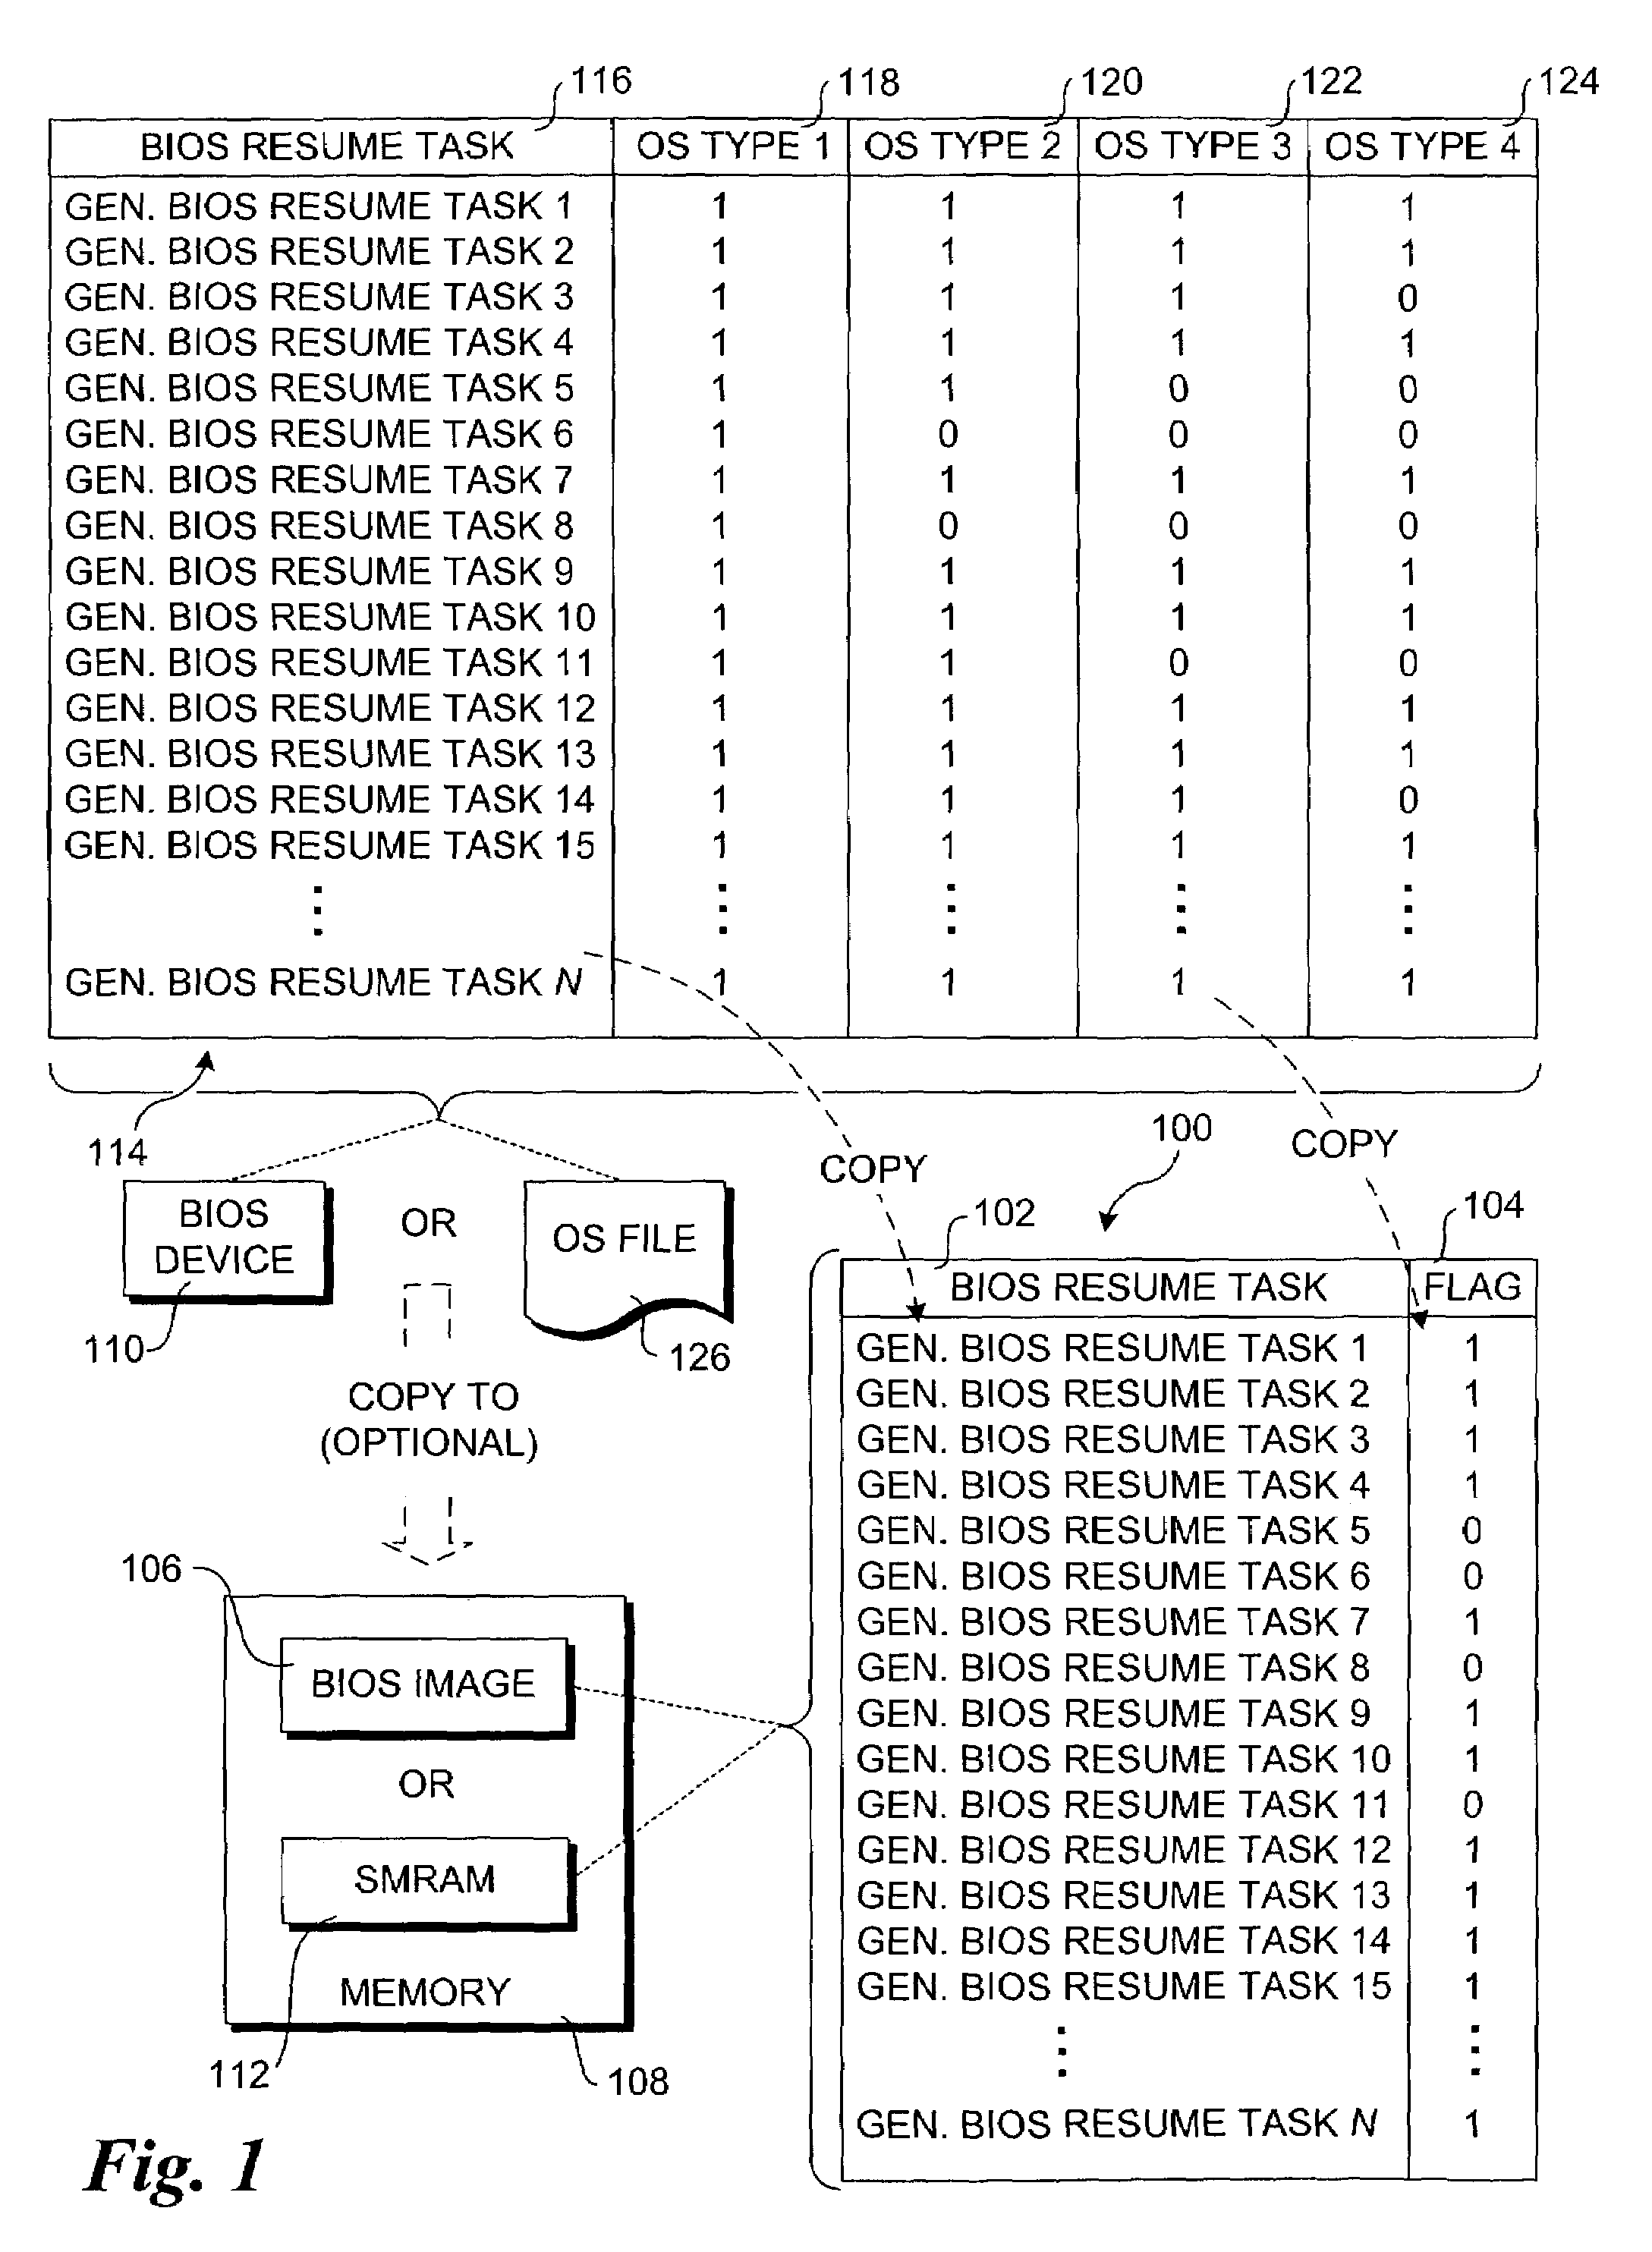 Method for reducing BIOS resume time from a sleeping state